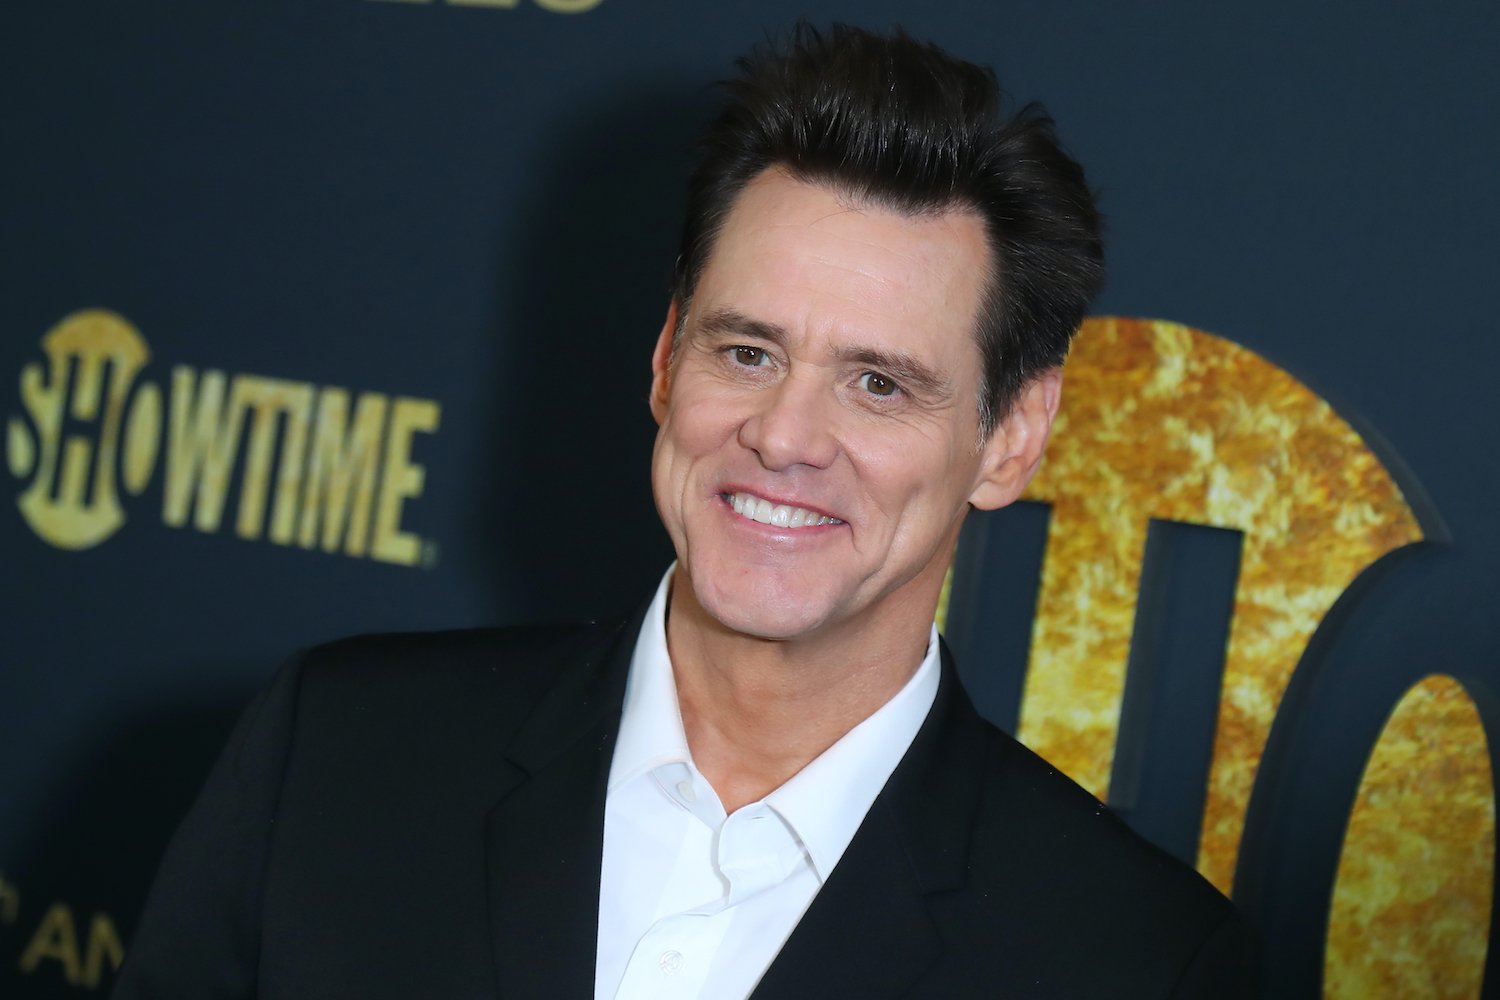 Jim Carrey attends the Showtime Golden Globe Nominees Celebration at Sunset Tower Hotel on January 05, 2019